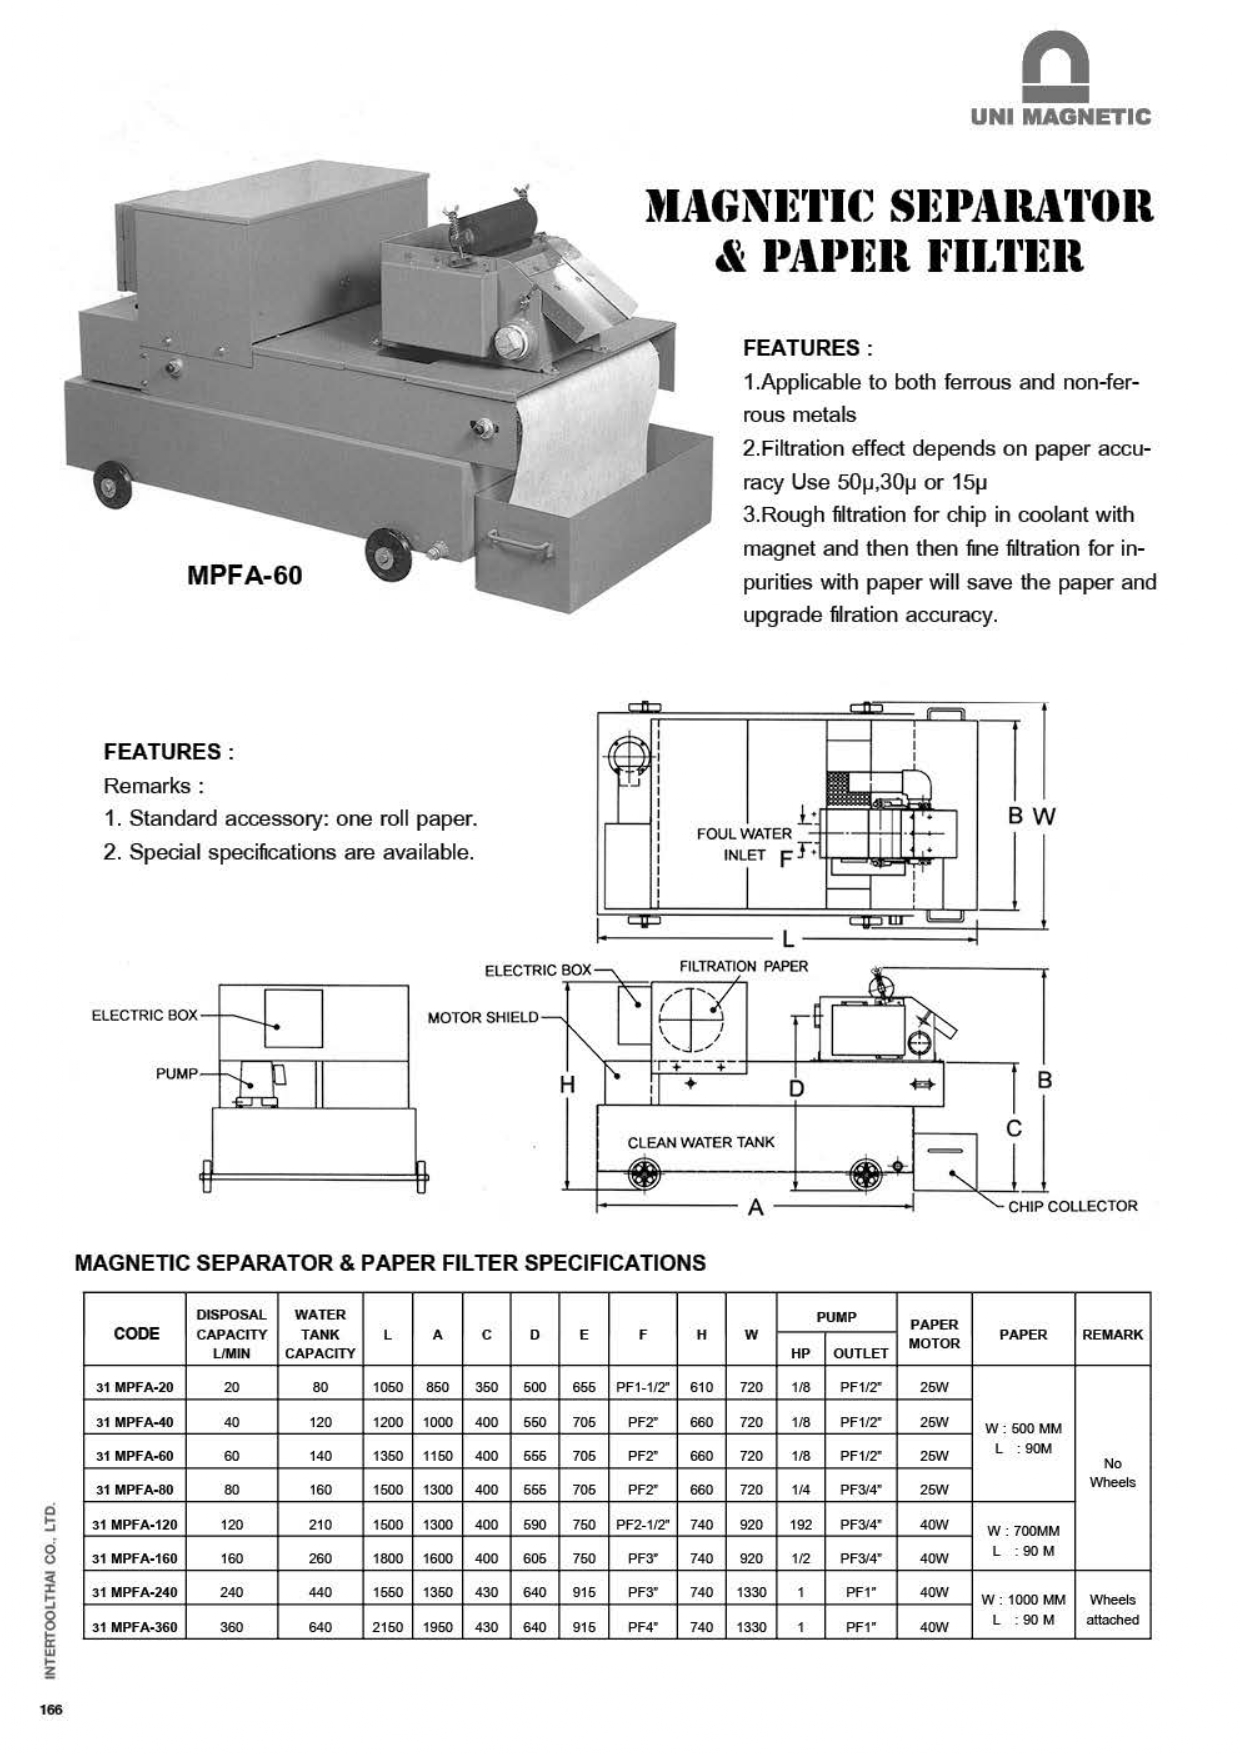 MPFA-MAGNETIC SEPARATOR & PAPER FIL TER SPECIFICATIONS